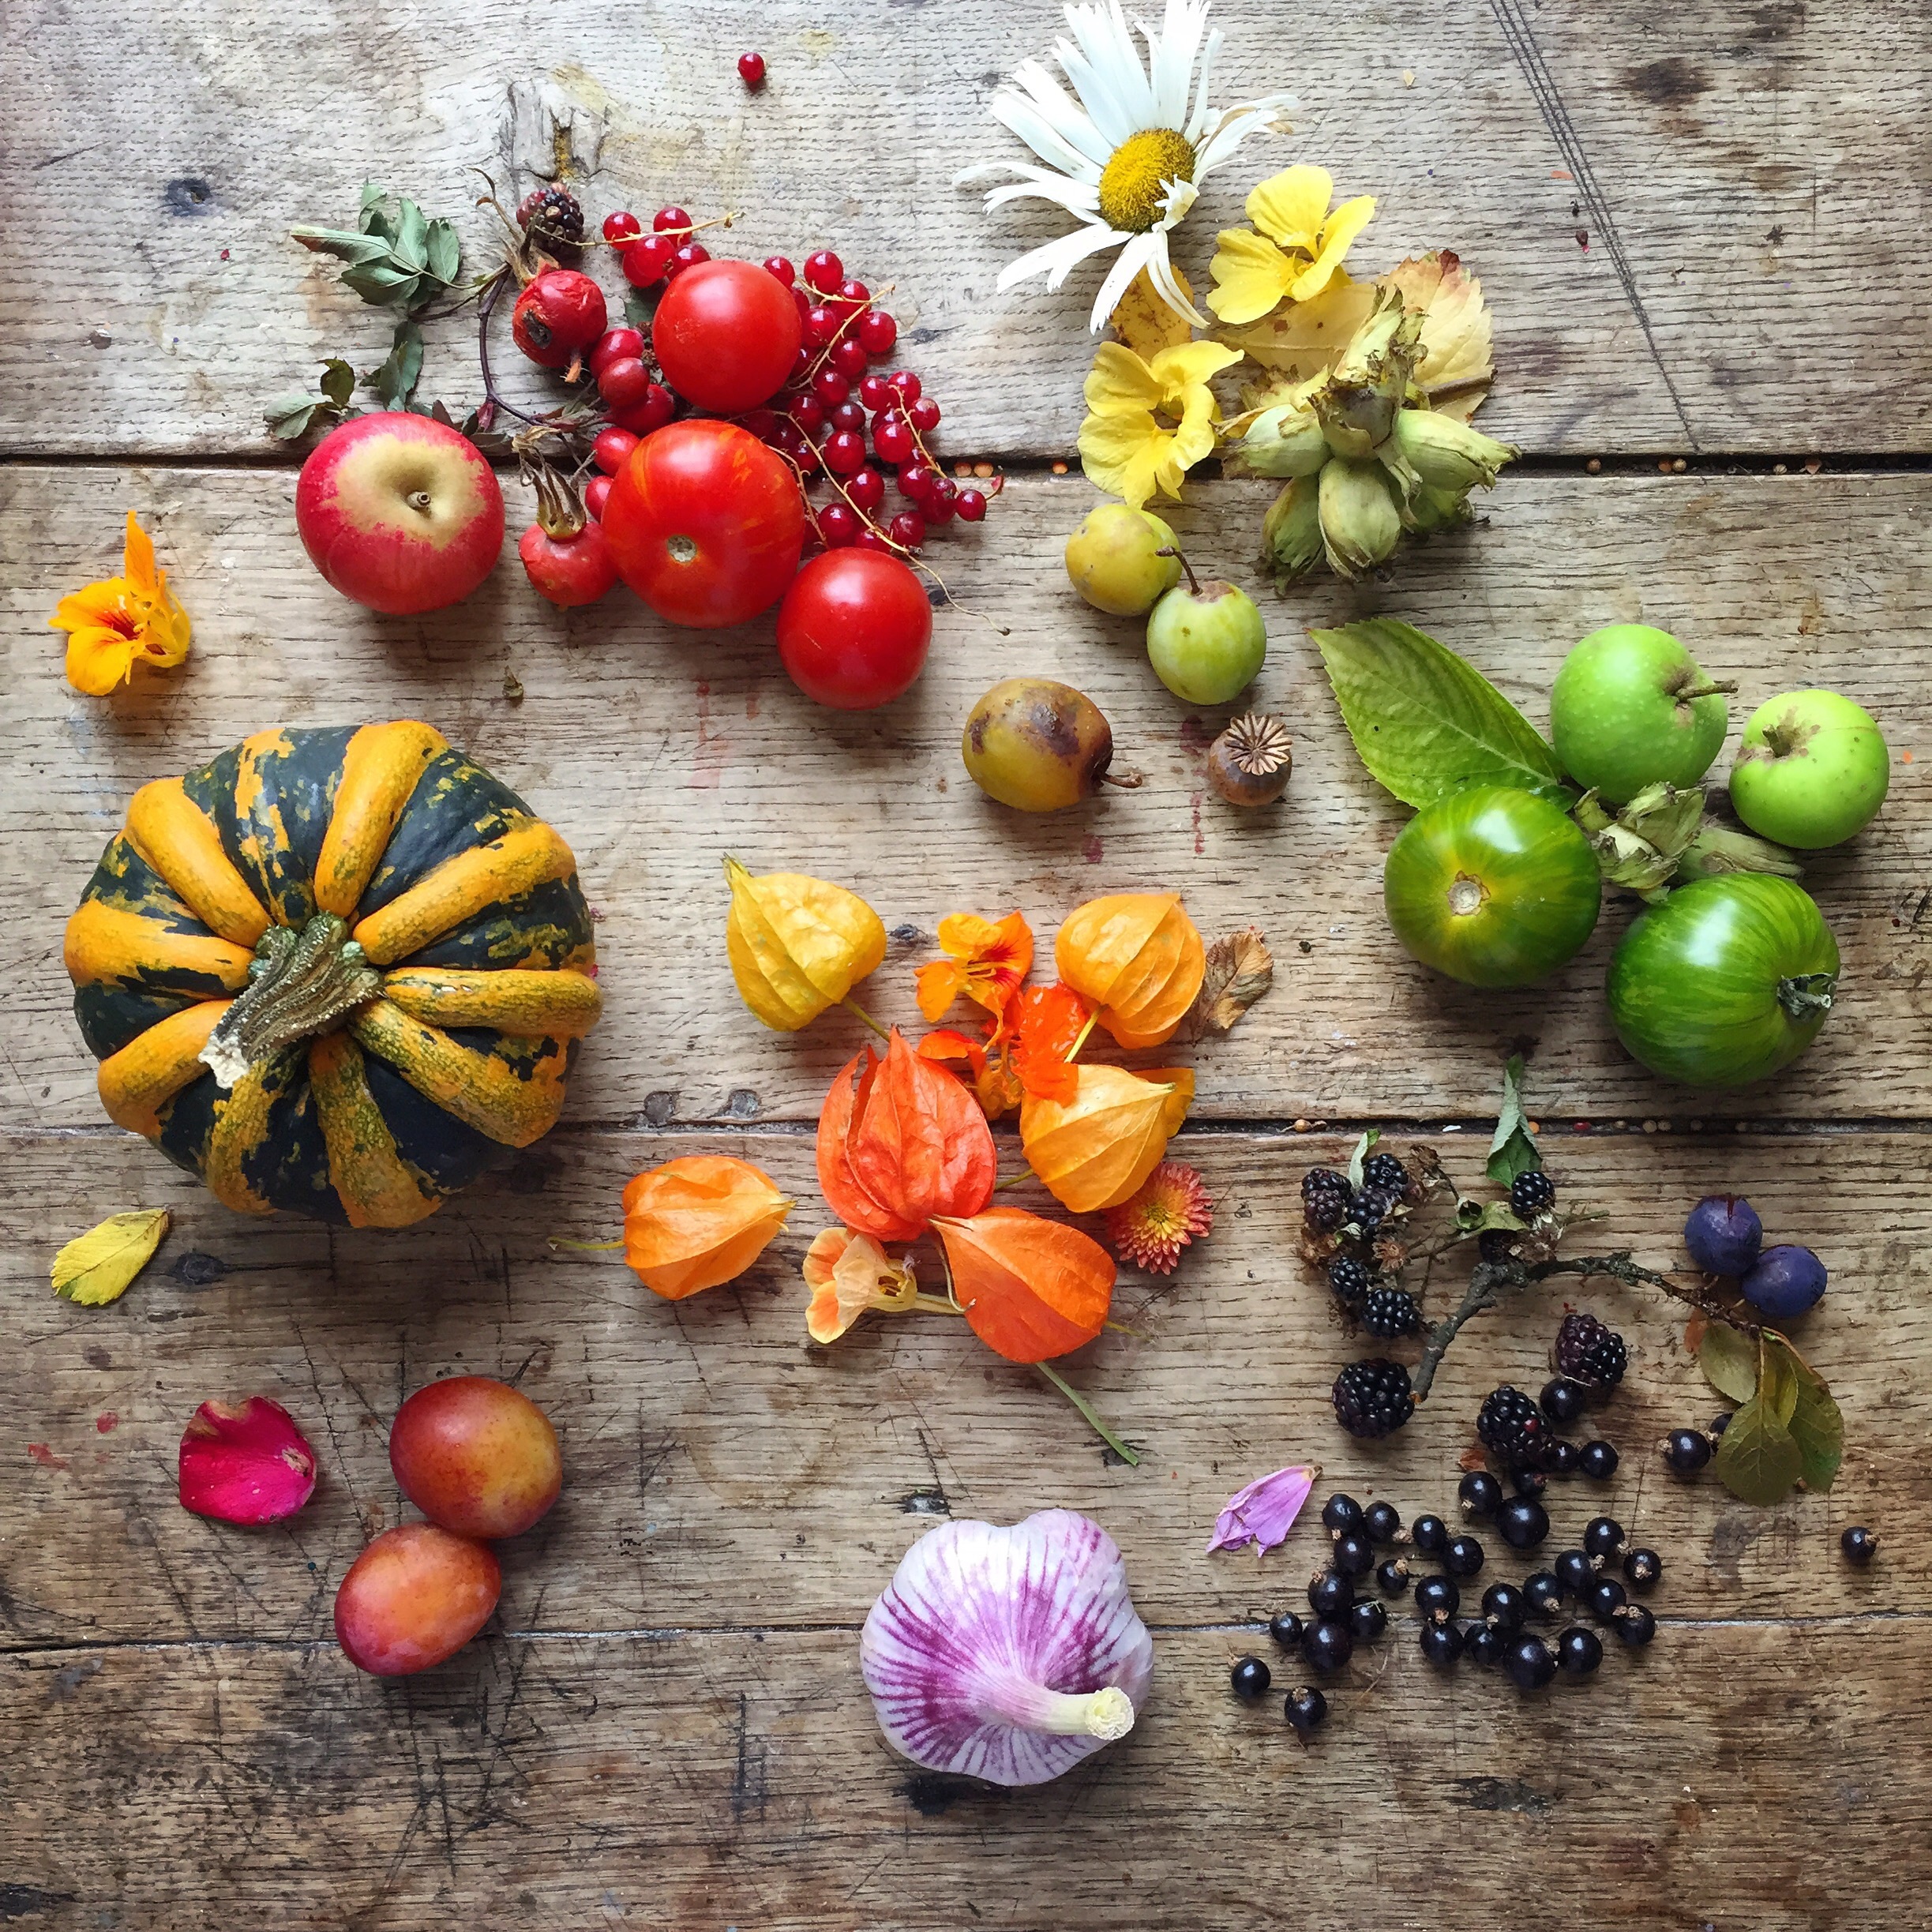 Colourful veg and fruit